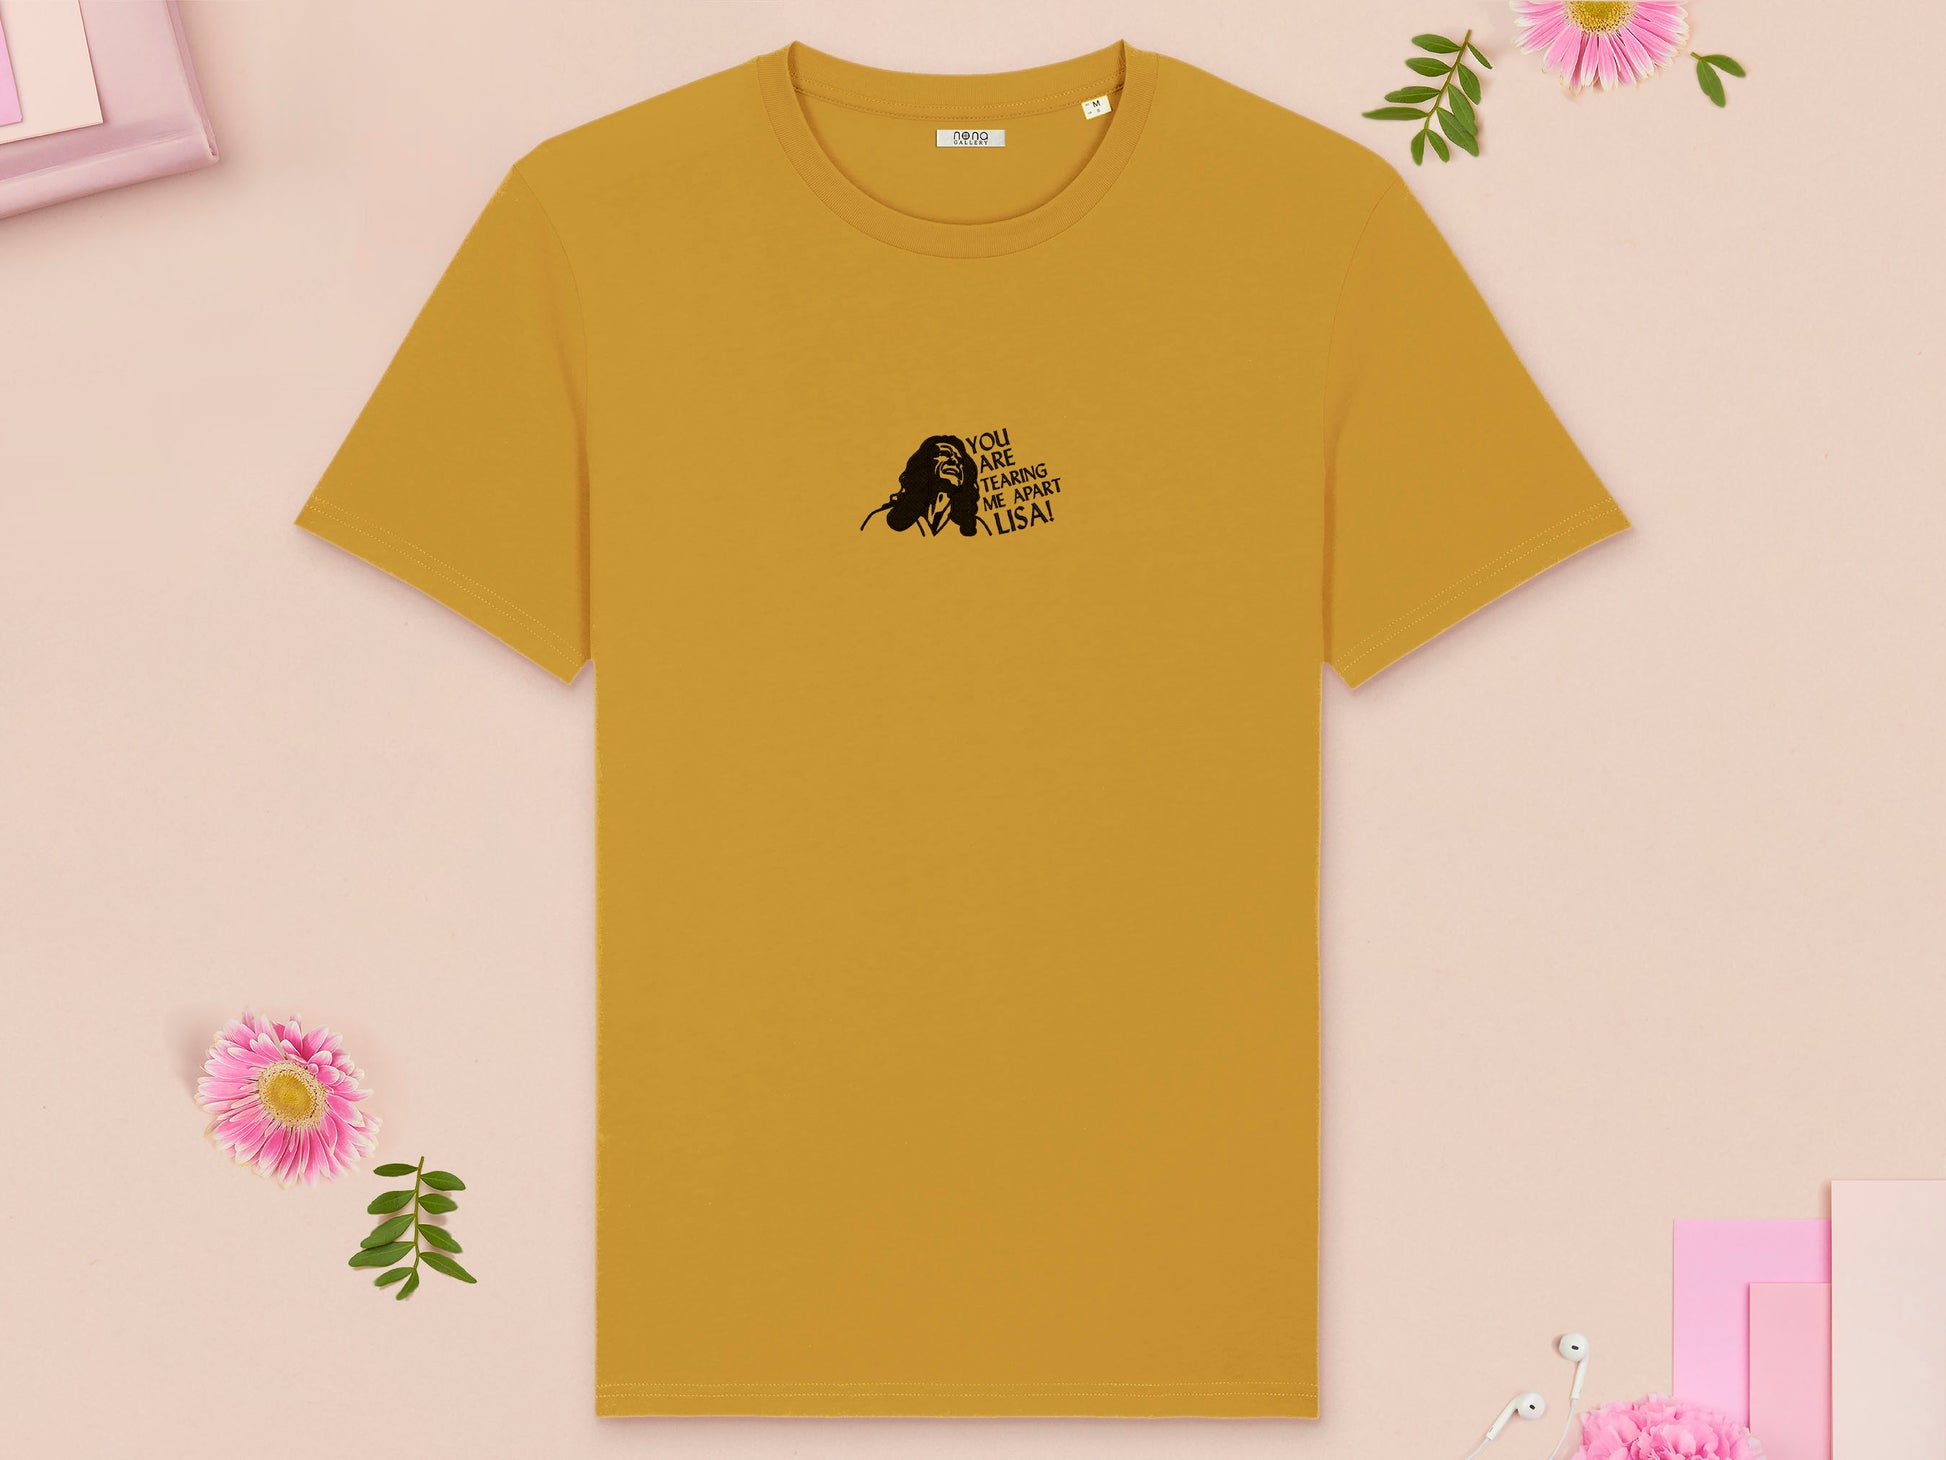 A short sleeved yellow t-shirt with an embroidered black design of Tommy Wiseau in the movie The Room with the quote You Are Tearing Me Apart Lisa!